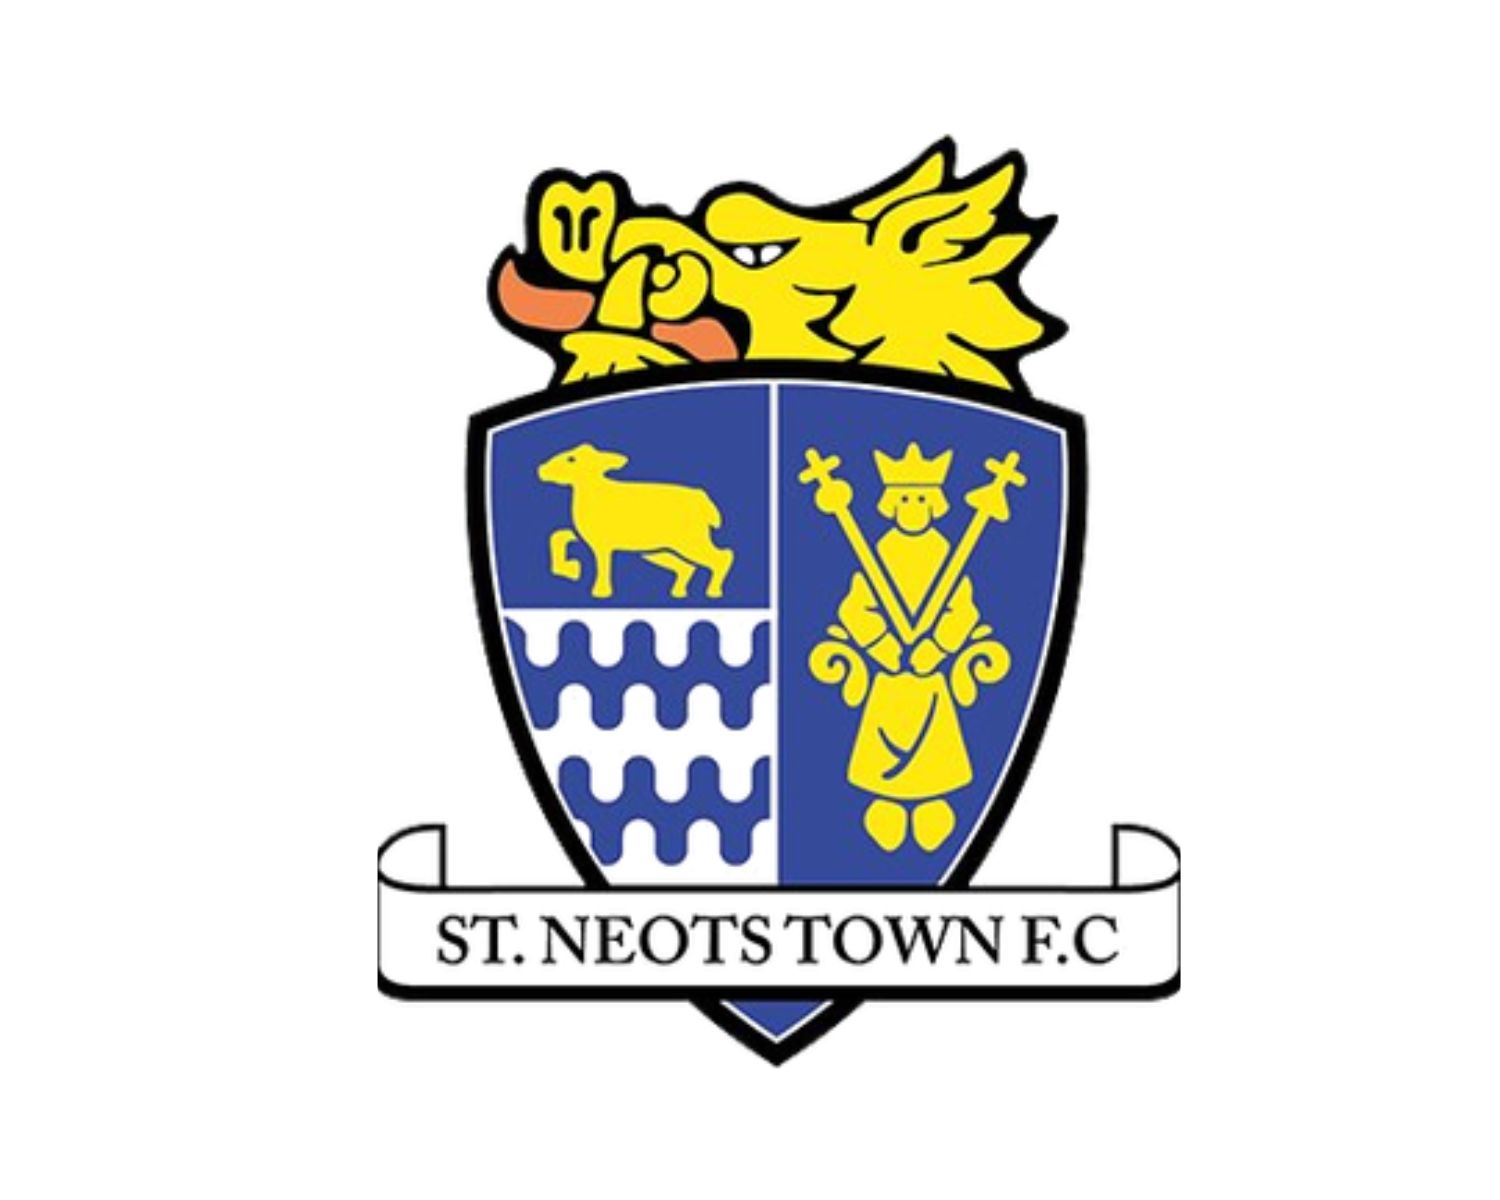 St Neots Town FC: 24 Football Club Facts - Facts.net